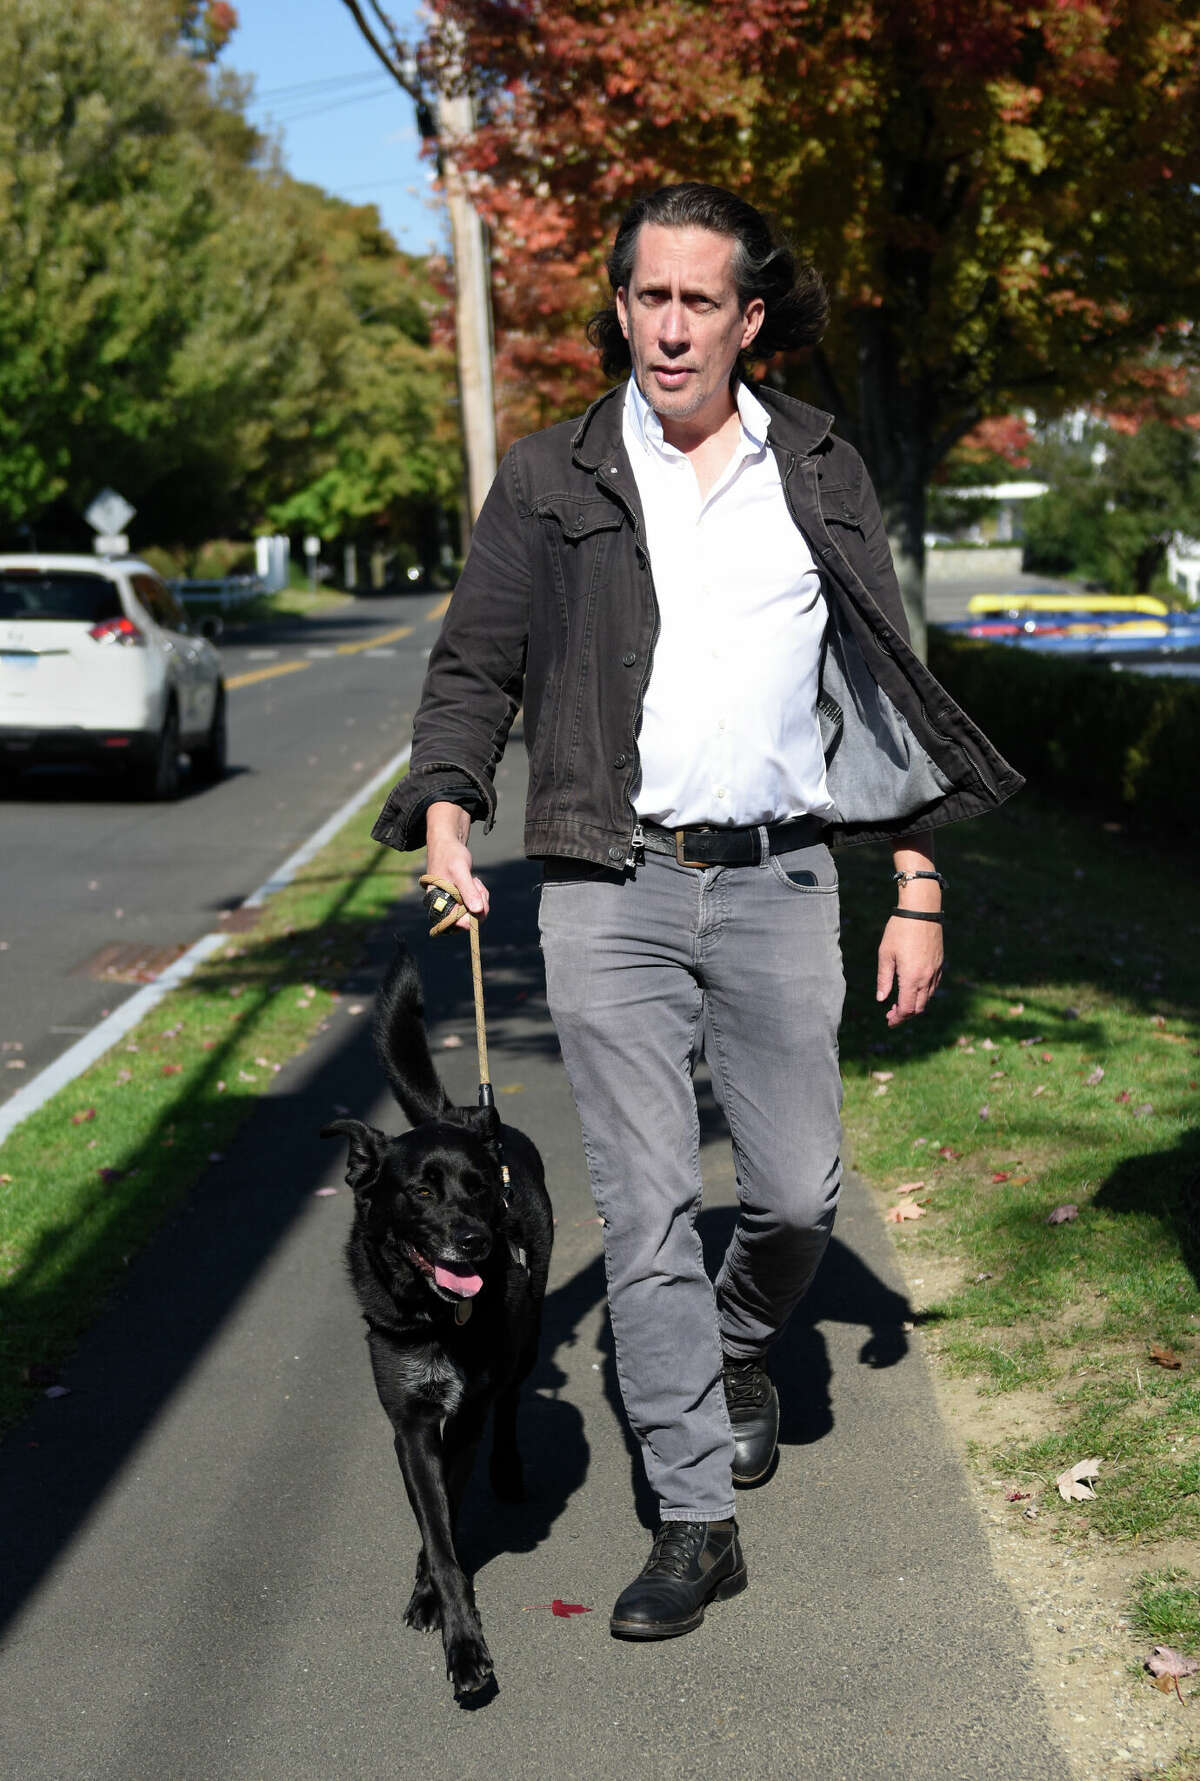 Photographer Jay Wilson walks his dog, Shadow, around his neighborhood in the Cos Cob section of Greenwich, Conn. Monday, Oct. 10, 2022. Wilson turned his nightly walks in his Greenwich neighborhood with his dog into a photographic exploration of "peace and safety" during COVID.Â His work is now on view at the Cos Cob Library through Oct. 31.